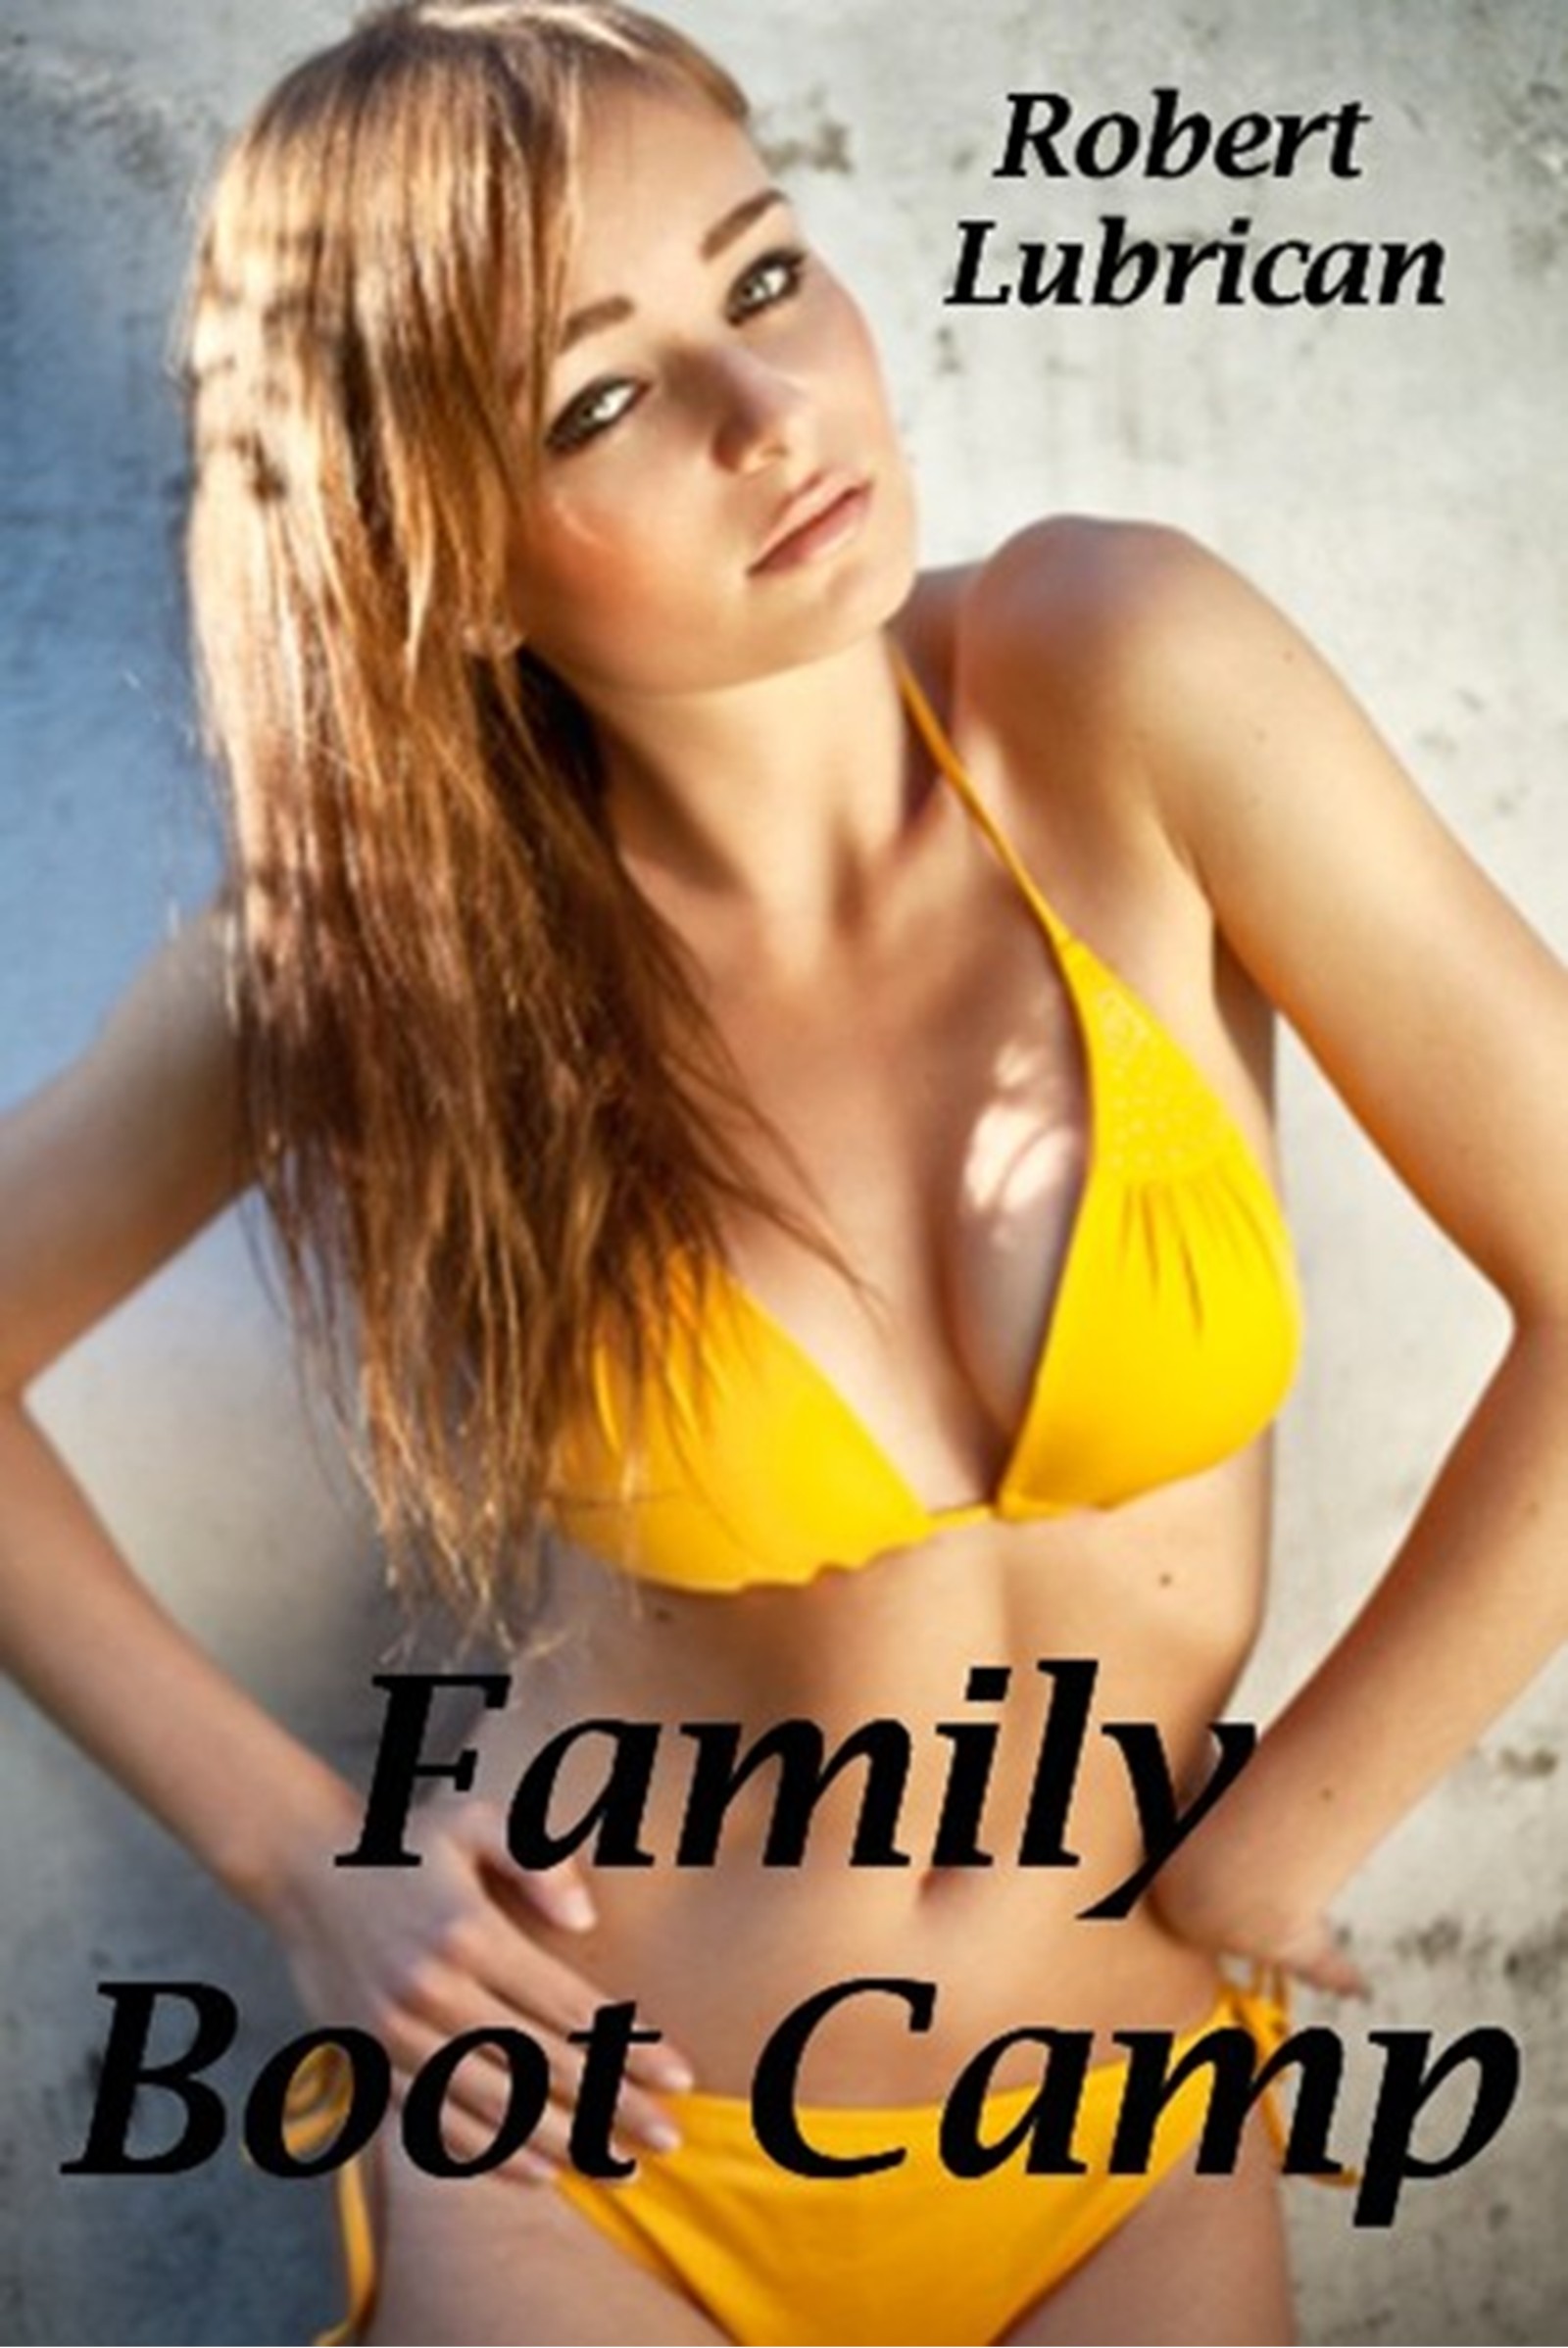 Family Boot Camp, an Ebook by Robert Lubrican